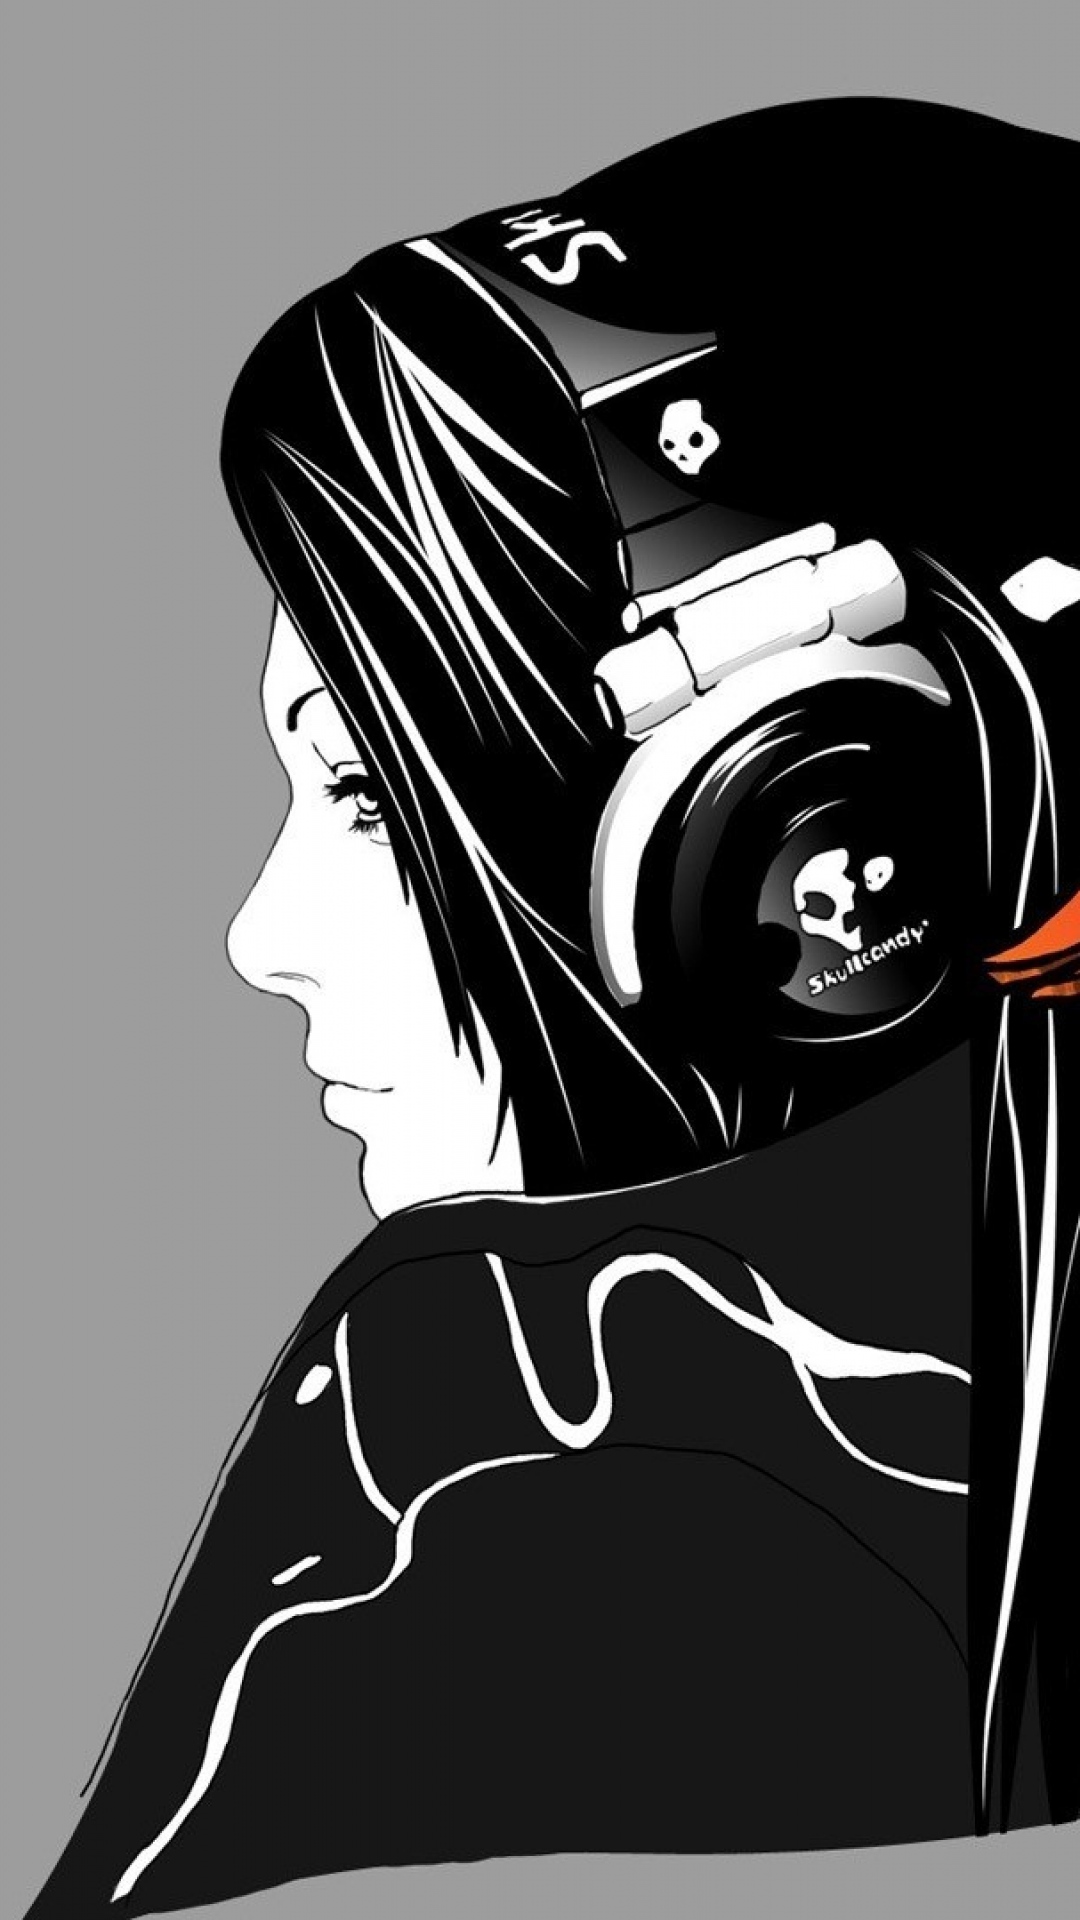 Free Download Minimal Girl Skull Headphones Music Android Wallpaper Download 1080x19 For Your Desktop Mobile Tablet Explore 49 Android Girl Wallpaper Android Wallpapers Hd Free Wallpaper For Android Wallpapers